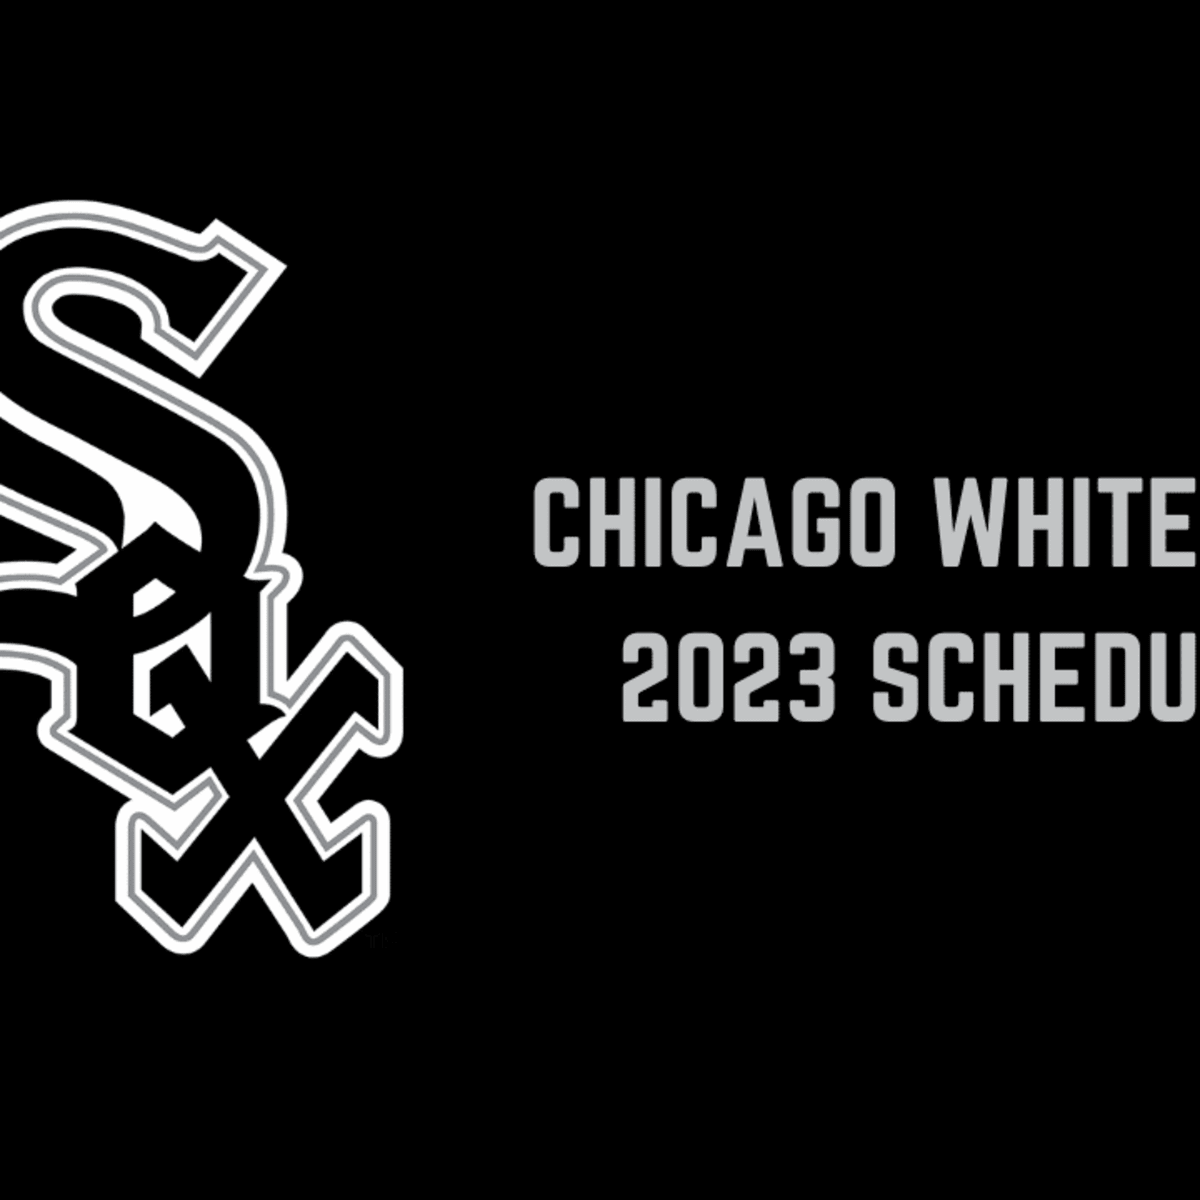 White Sox' 2023 schedule features games against every team